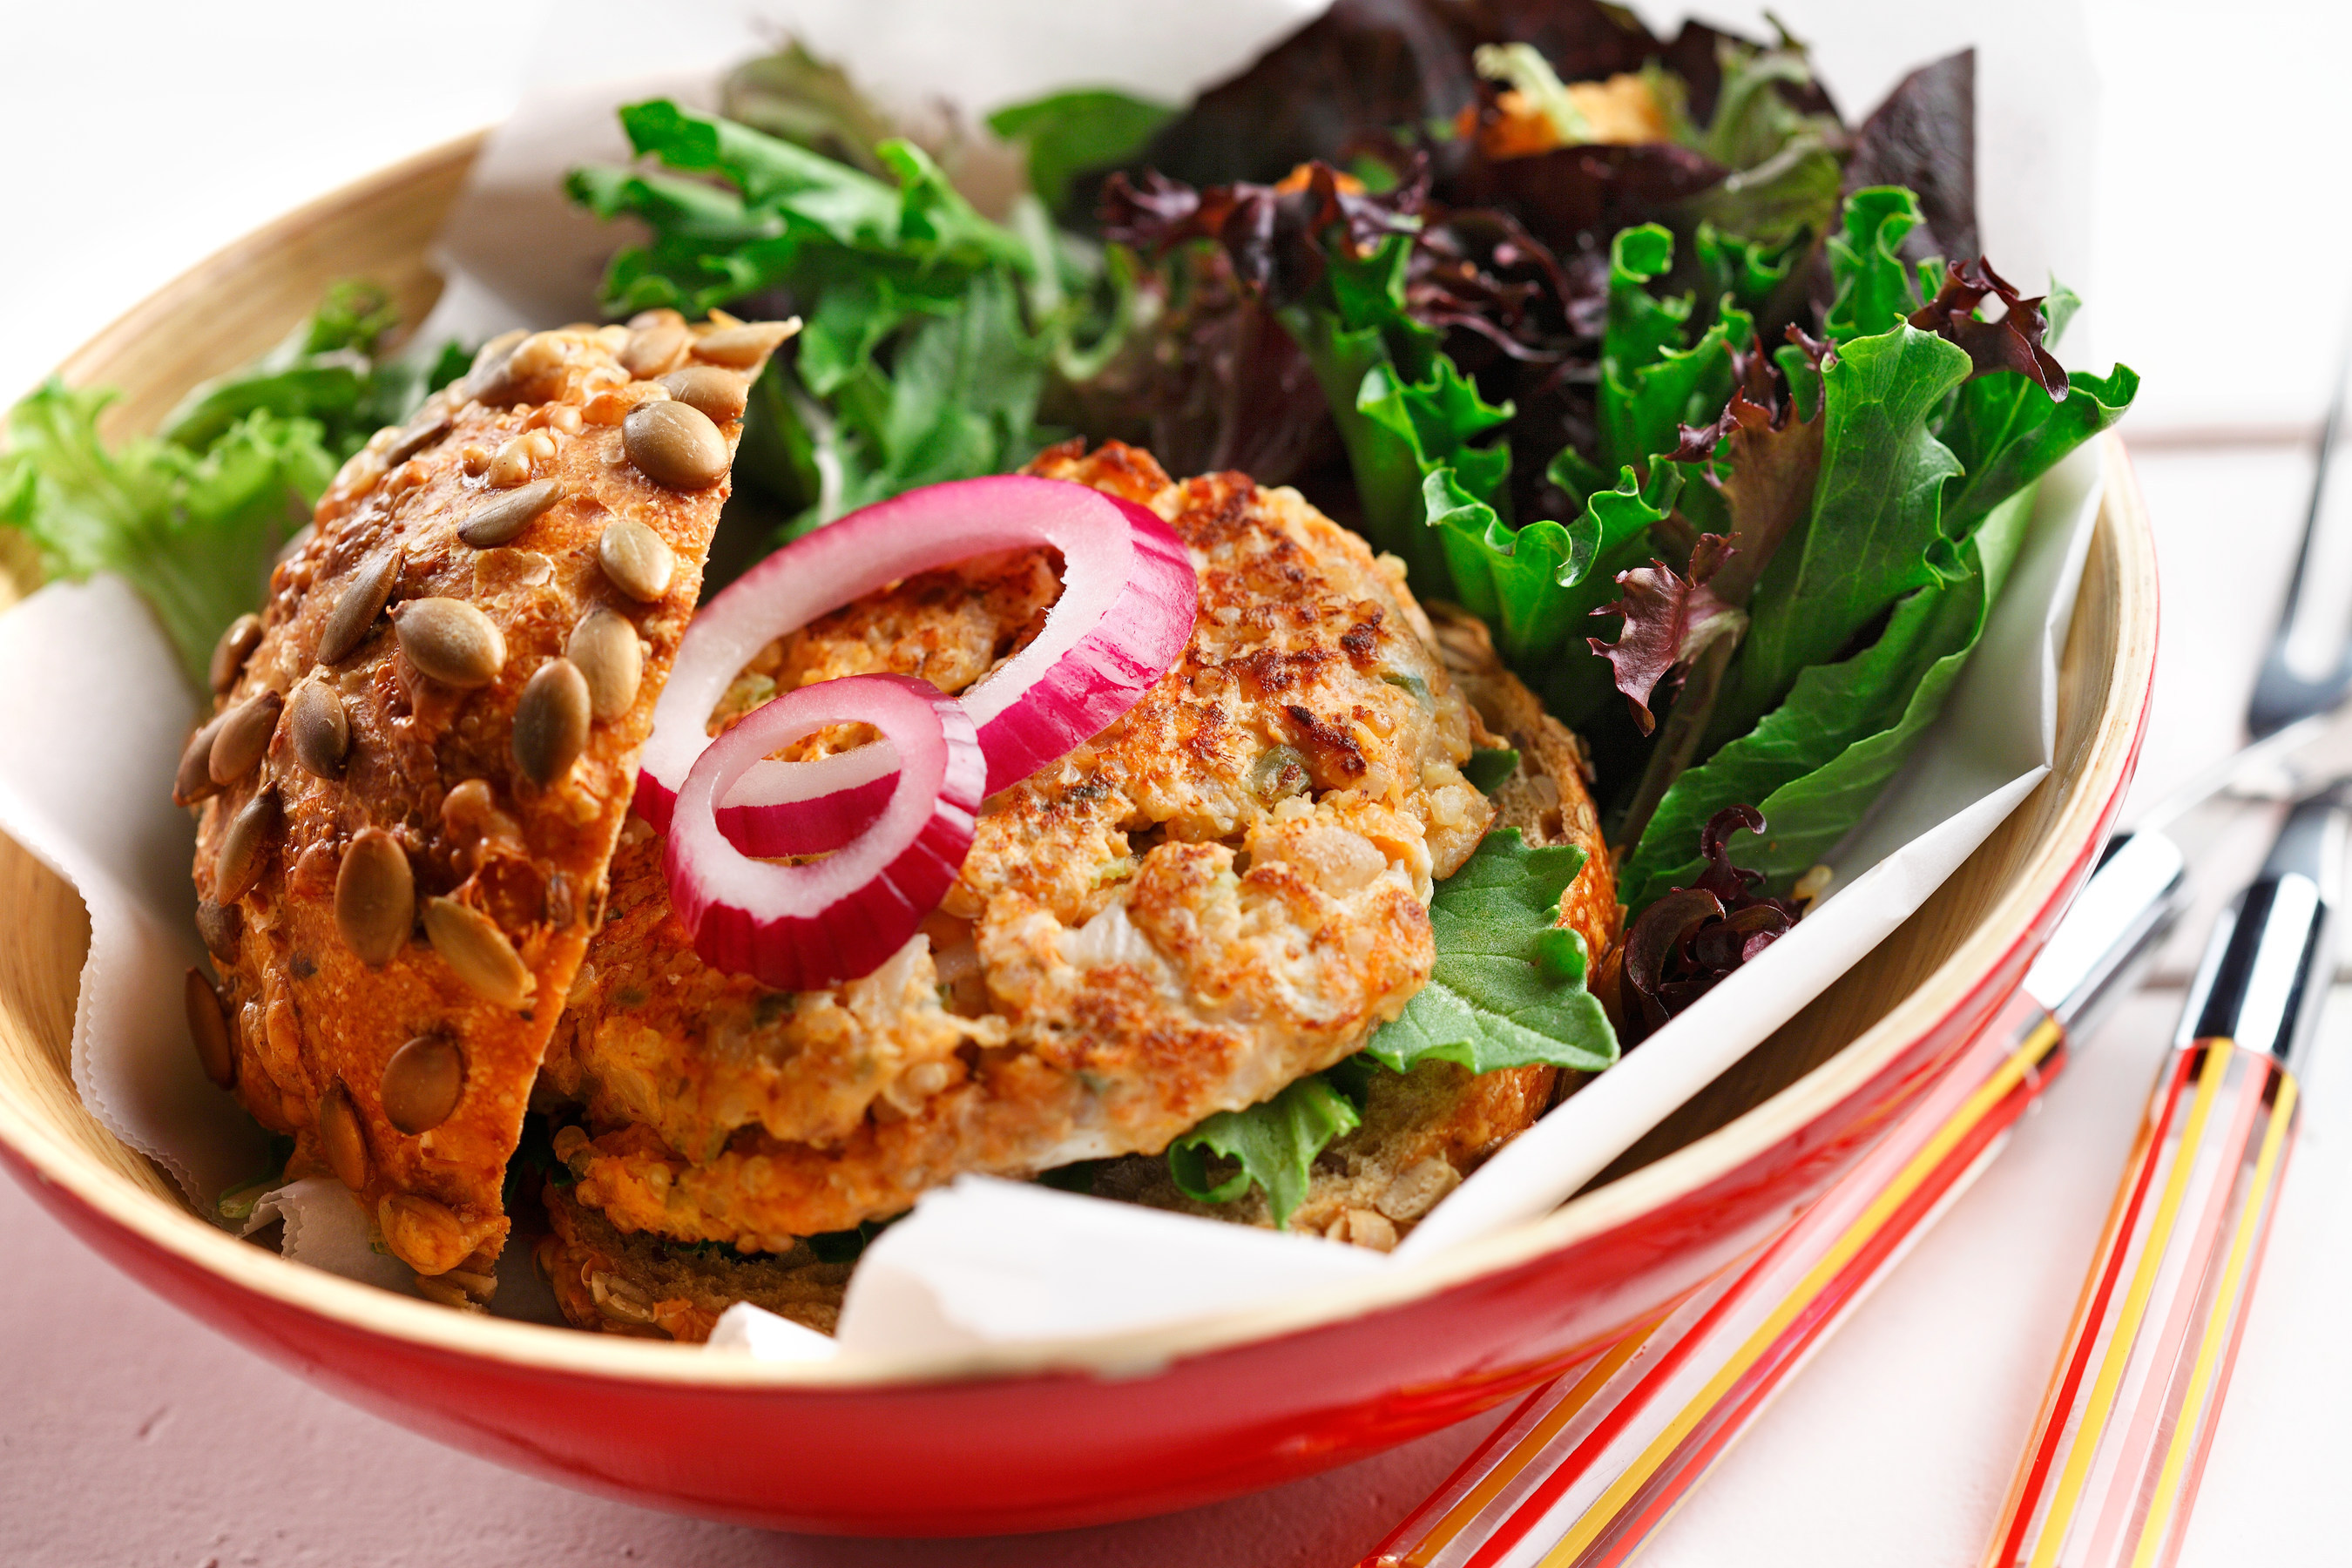 Salmon Quinoa Patties are a simple and delicious way to incorporate a whole grain and a lean protein in your next meal. Find out more about CanolaInfo's top 10 pantry essentials at CanolaInfo.org.